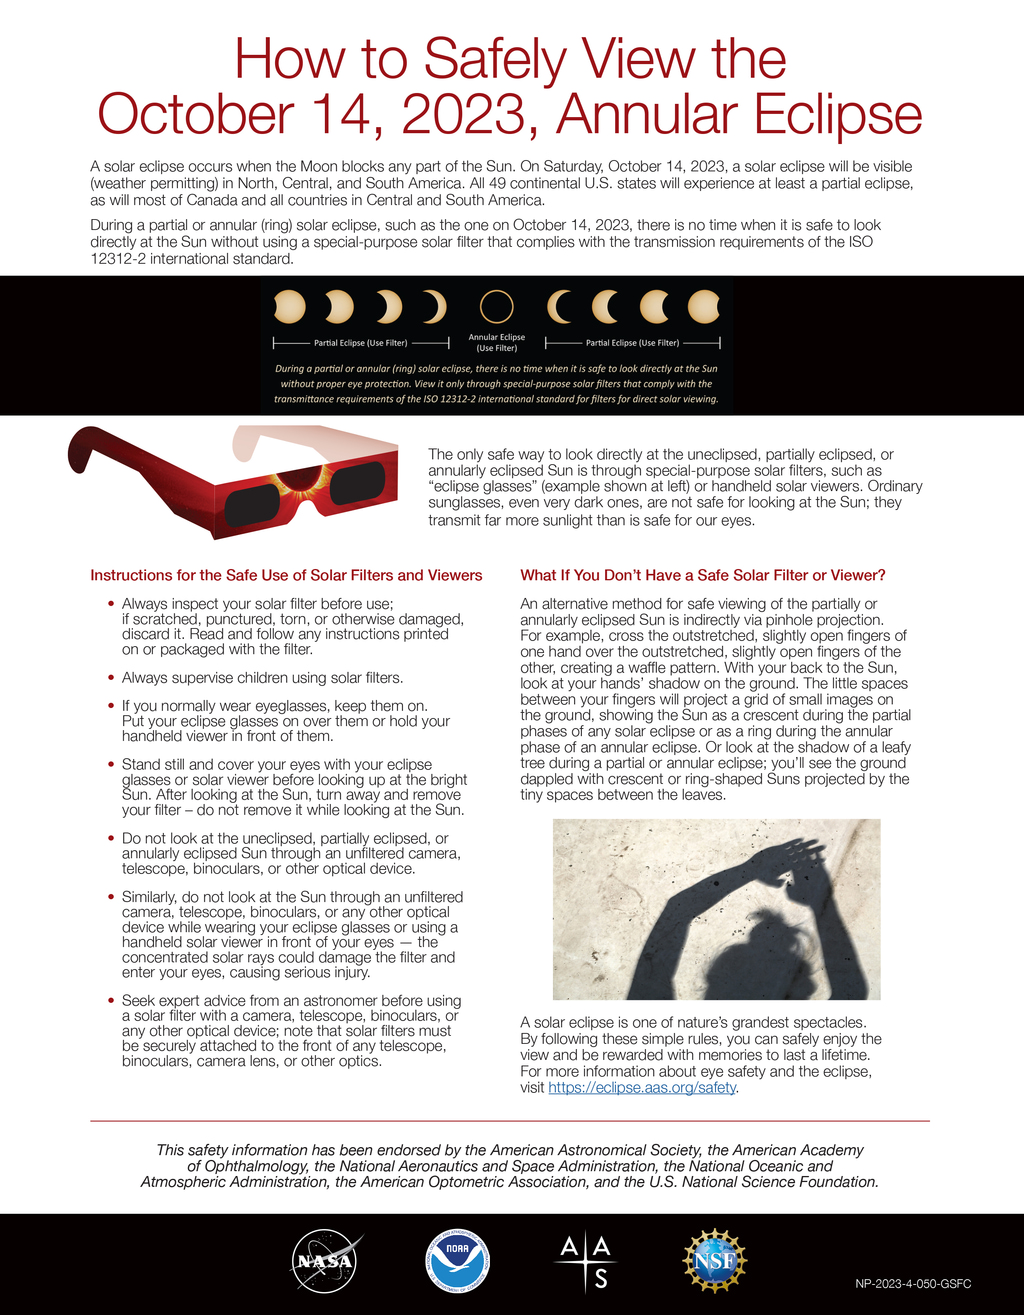 This educational flyer, created by NASA in collaboration with the American Astronomical Society (AAS), provides important information about the upcoming annular solar eclipse on October 14, 2023. It aims to educate and guide individuals on how to safely observe this celestial event.To download this flyer as a PDF, visit: solarsystem.nasa.gov.